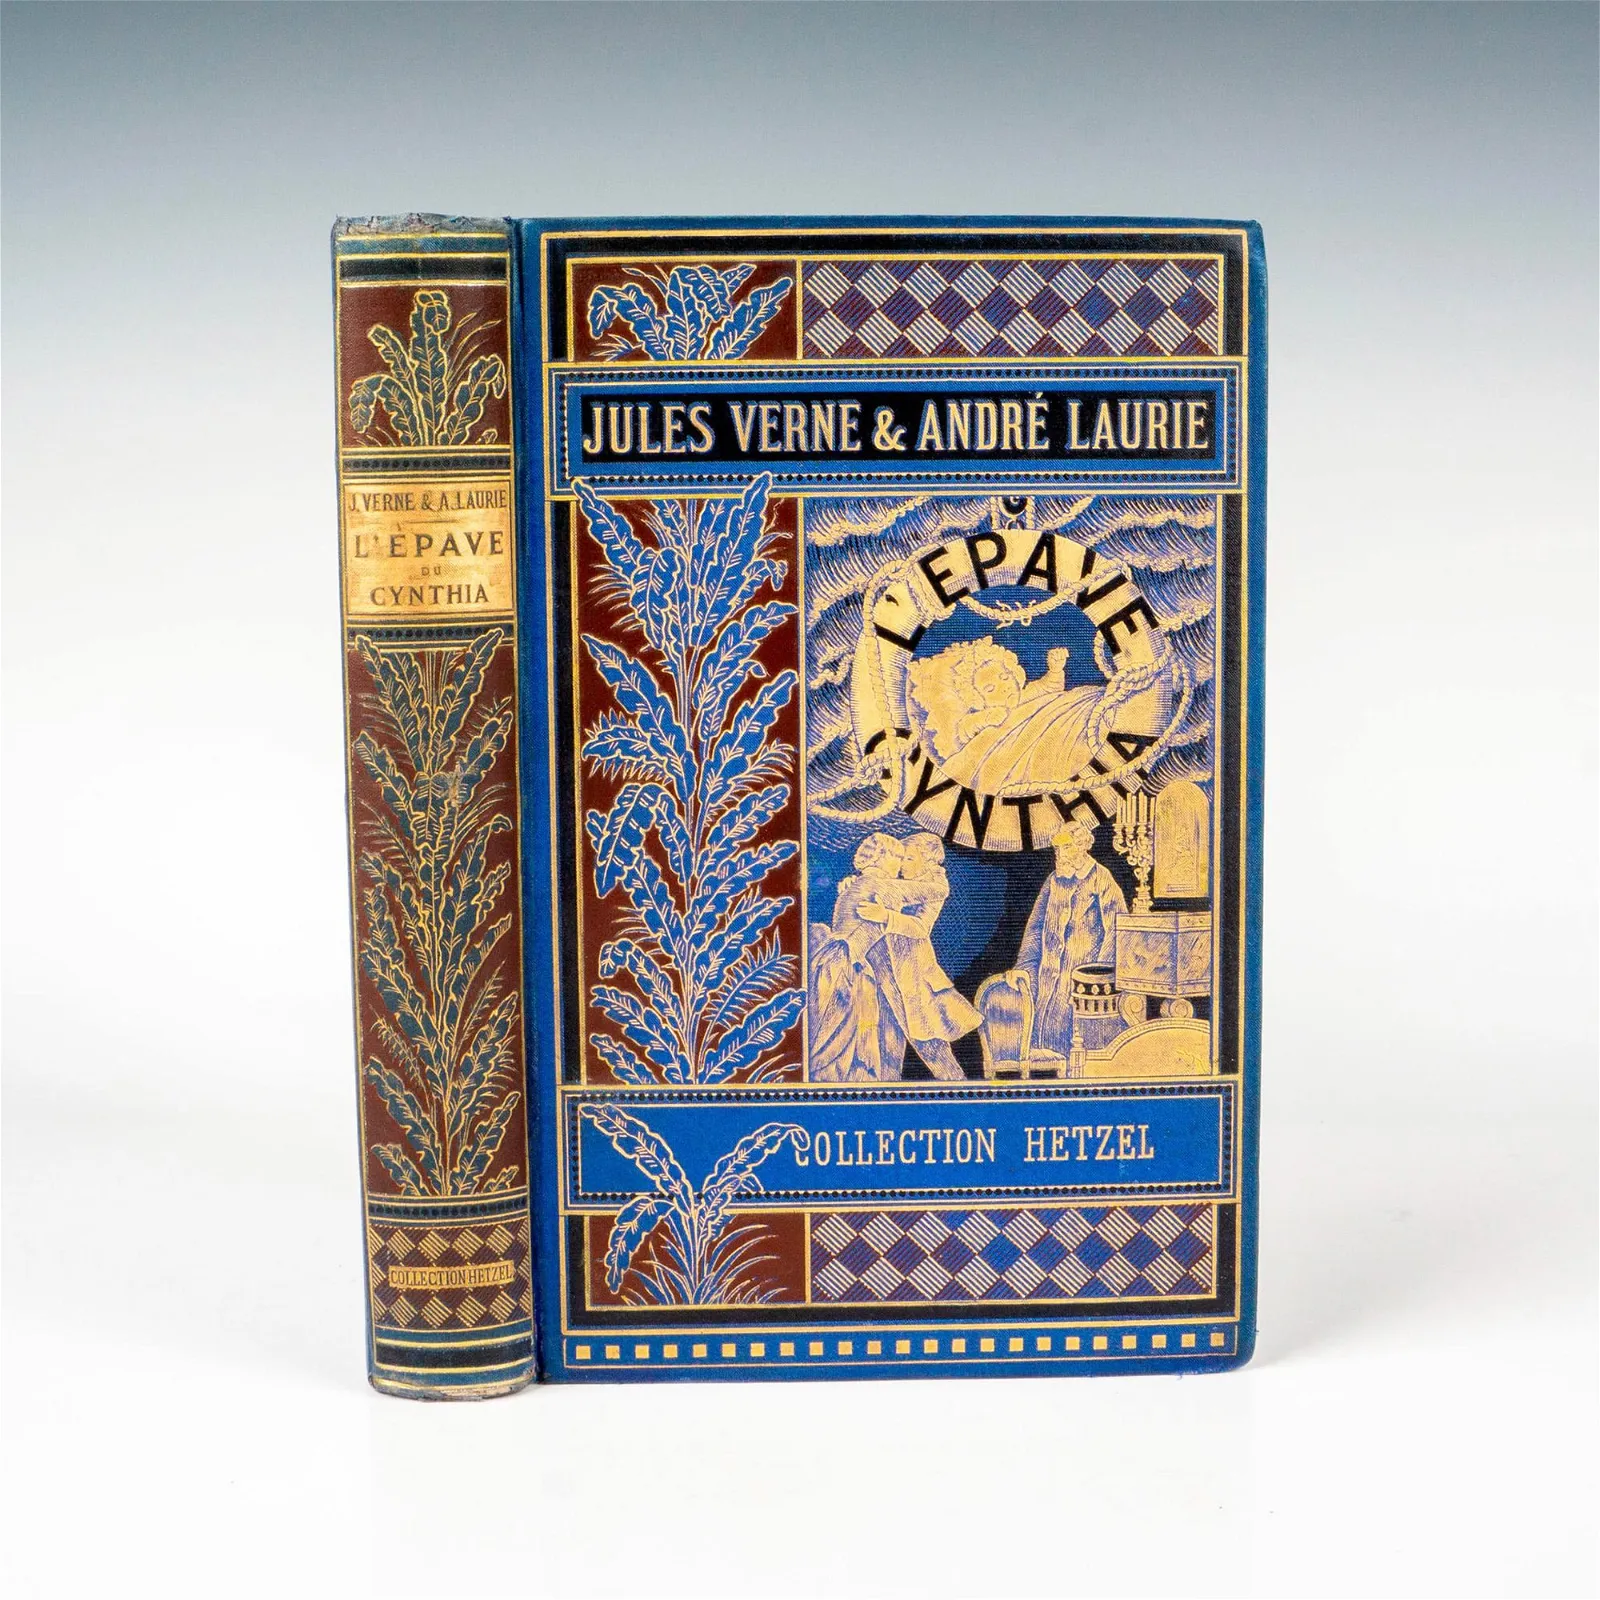 Lalique’s collection of Jules Verne books leads our picks for five lots to watch